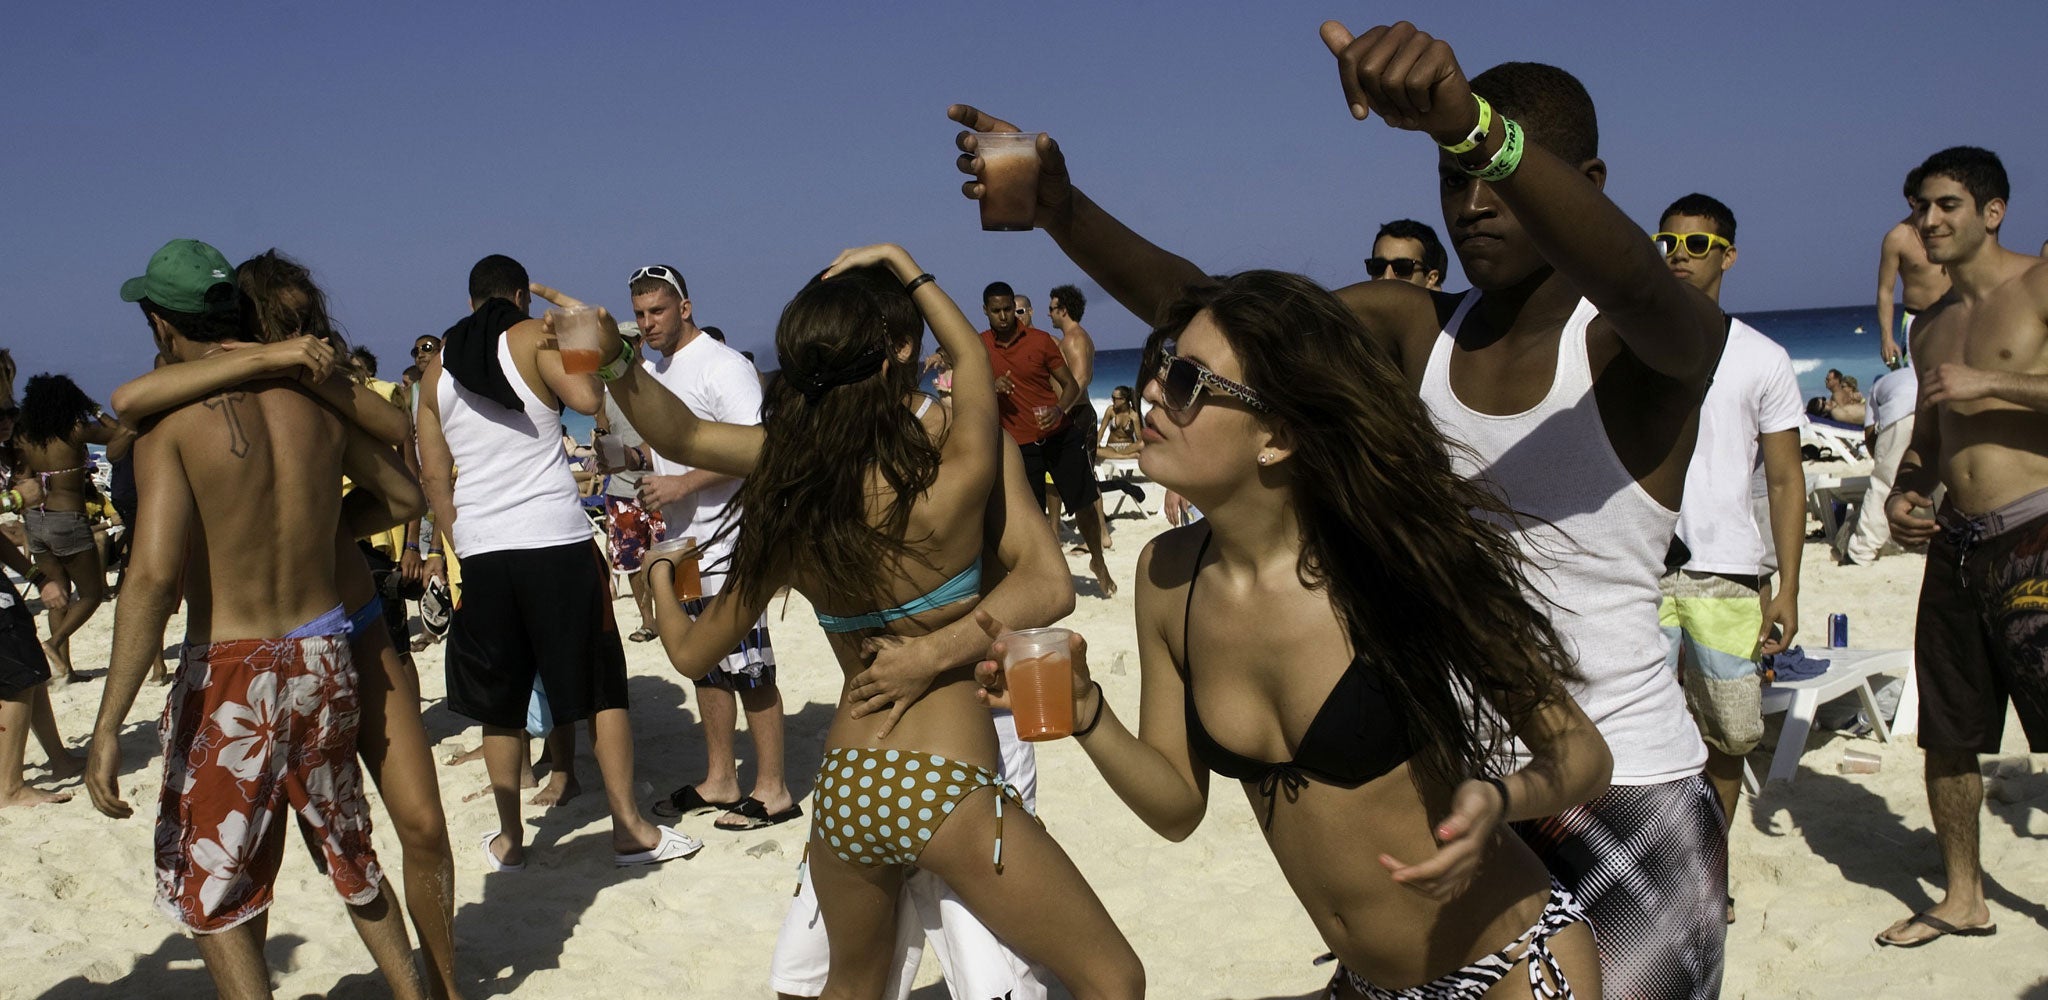 The truth about Spring Break Good times, selfdiscovery and lots of